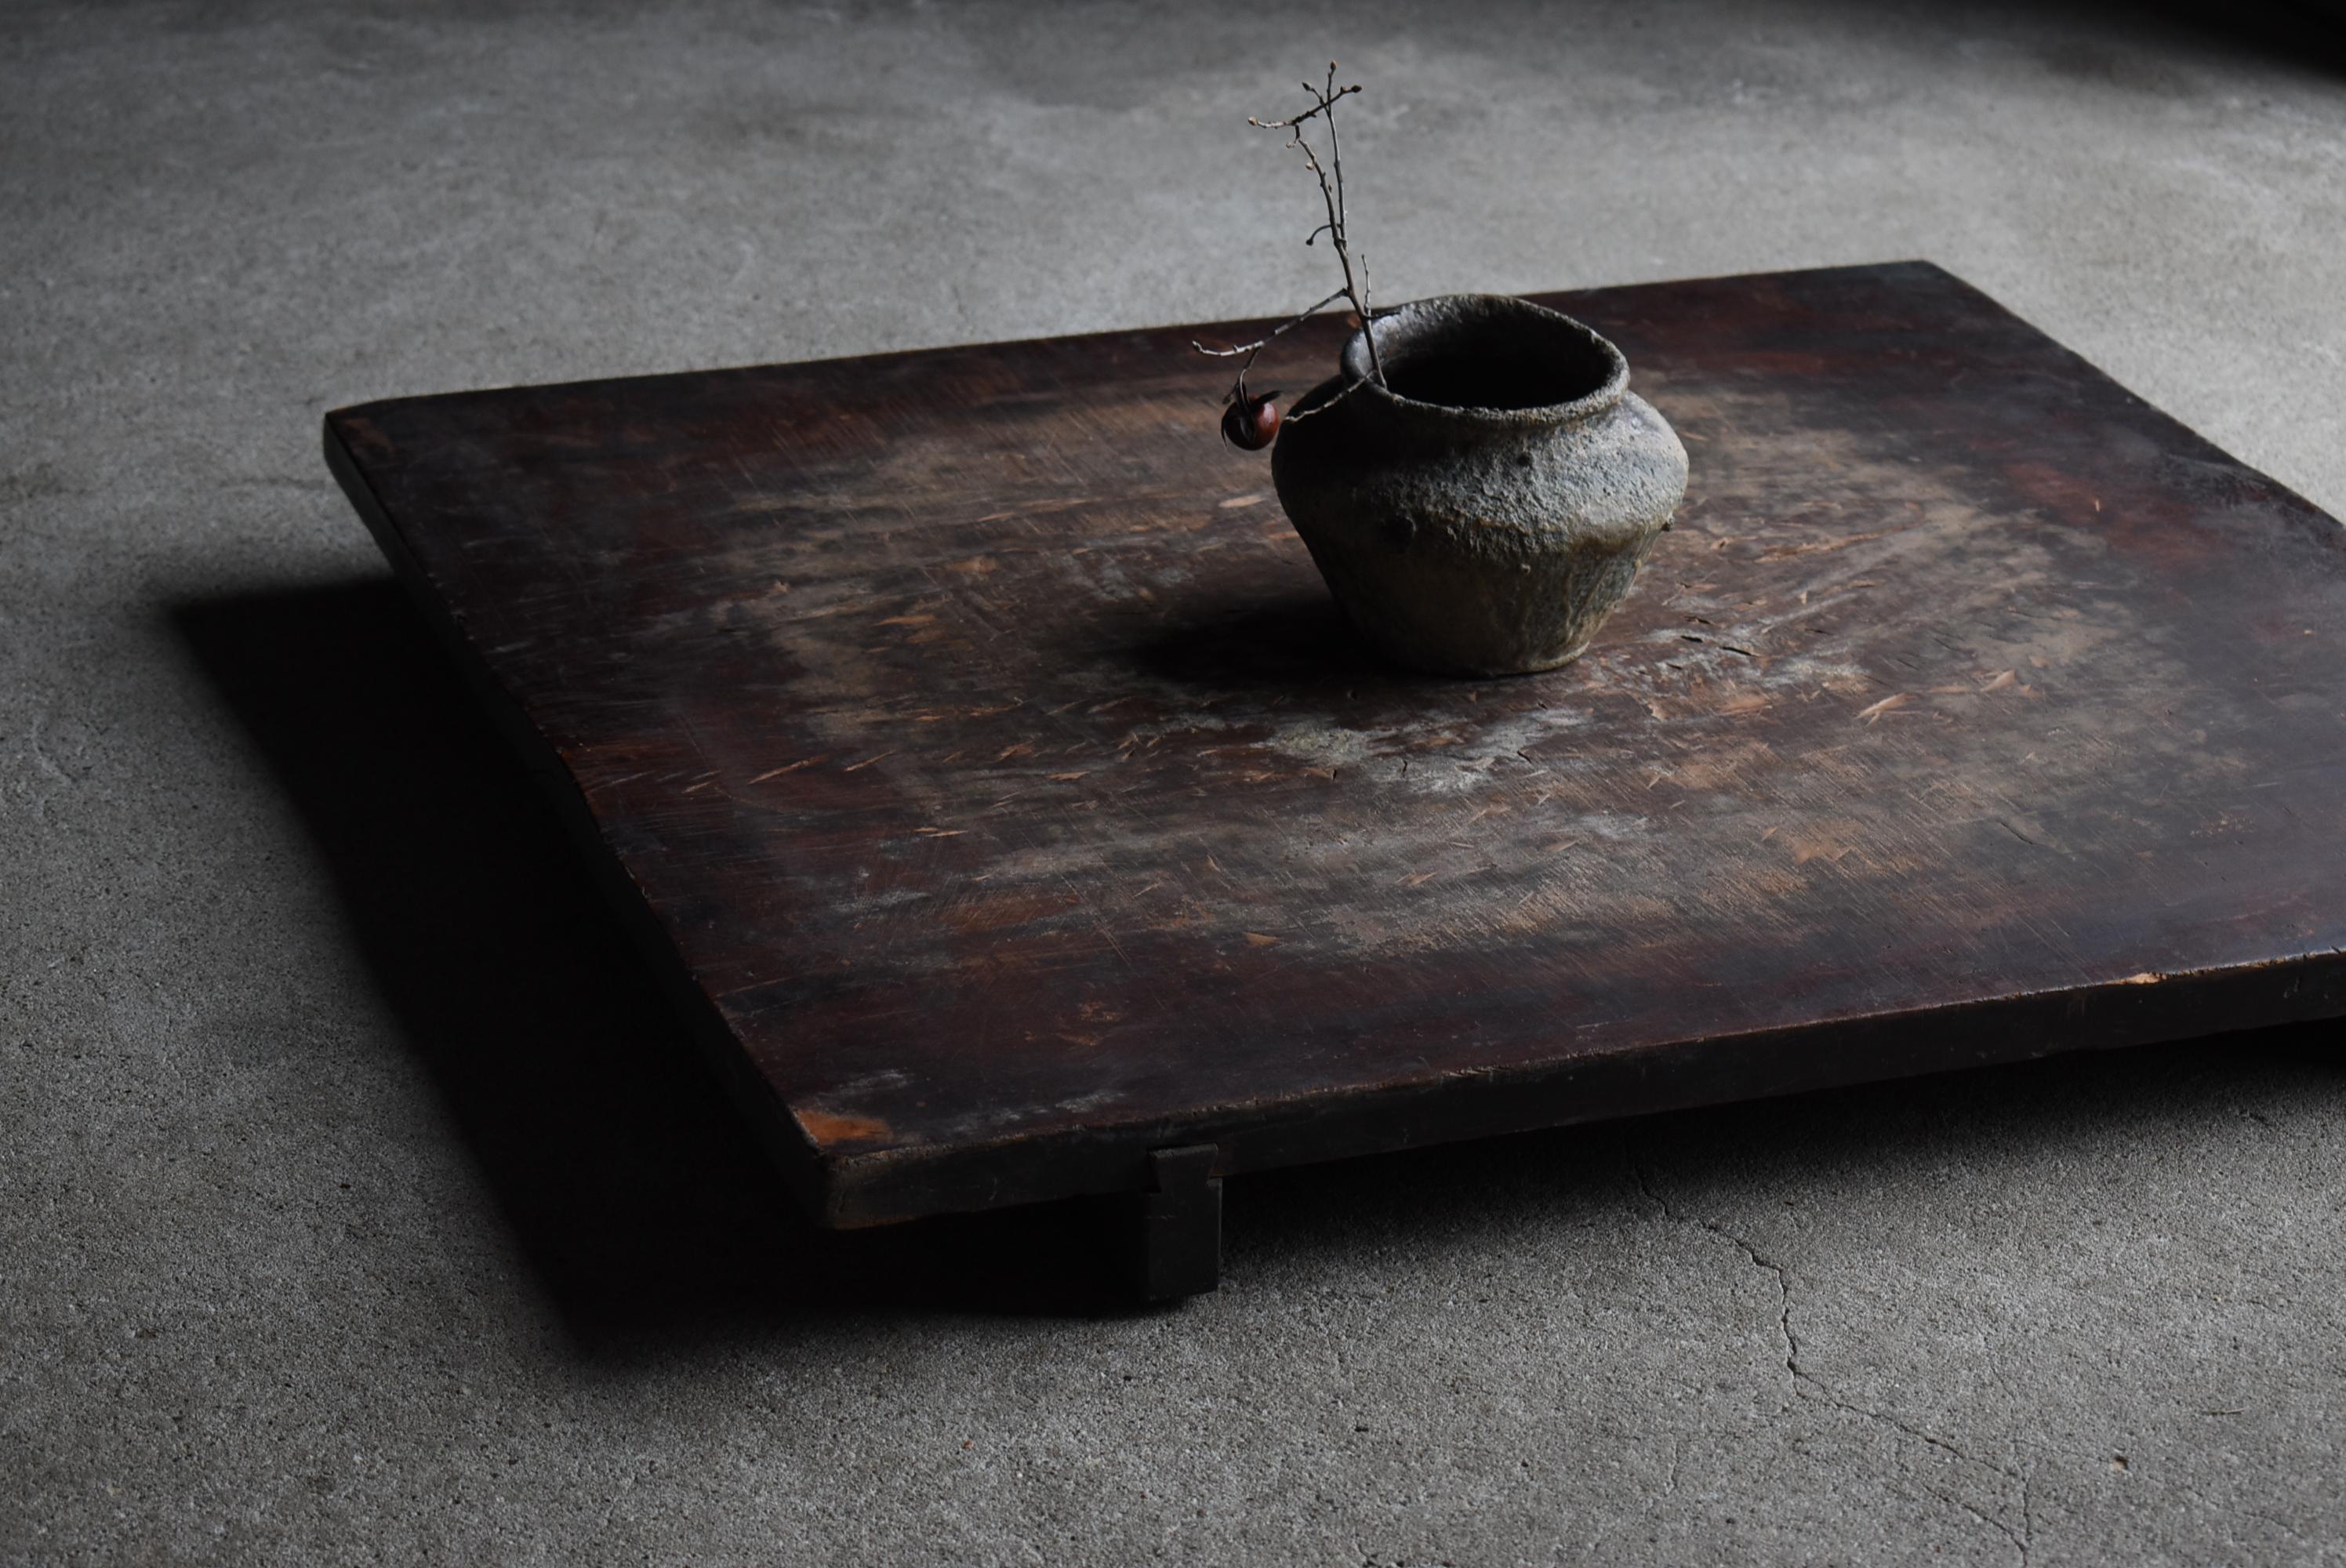 Japanese Antique Wooden Board 1860s-1900s / Abstract Art Low Table Wabi Sabi 10